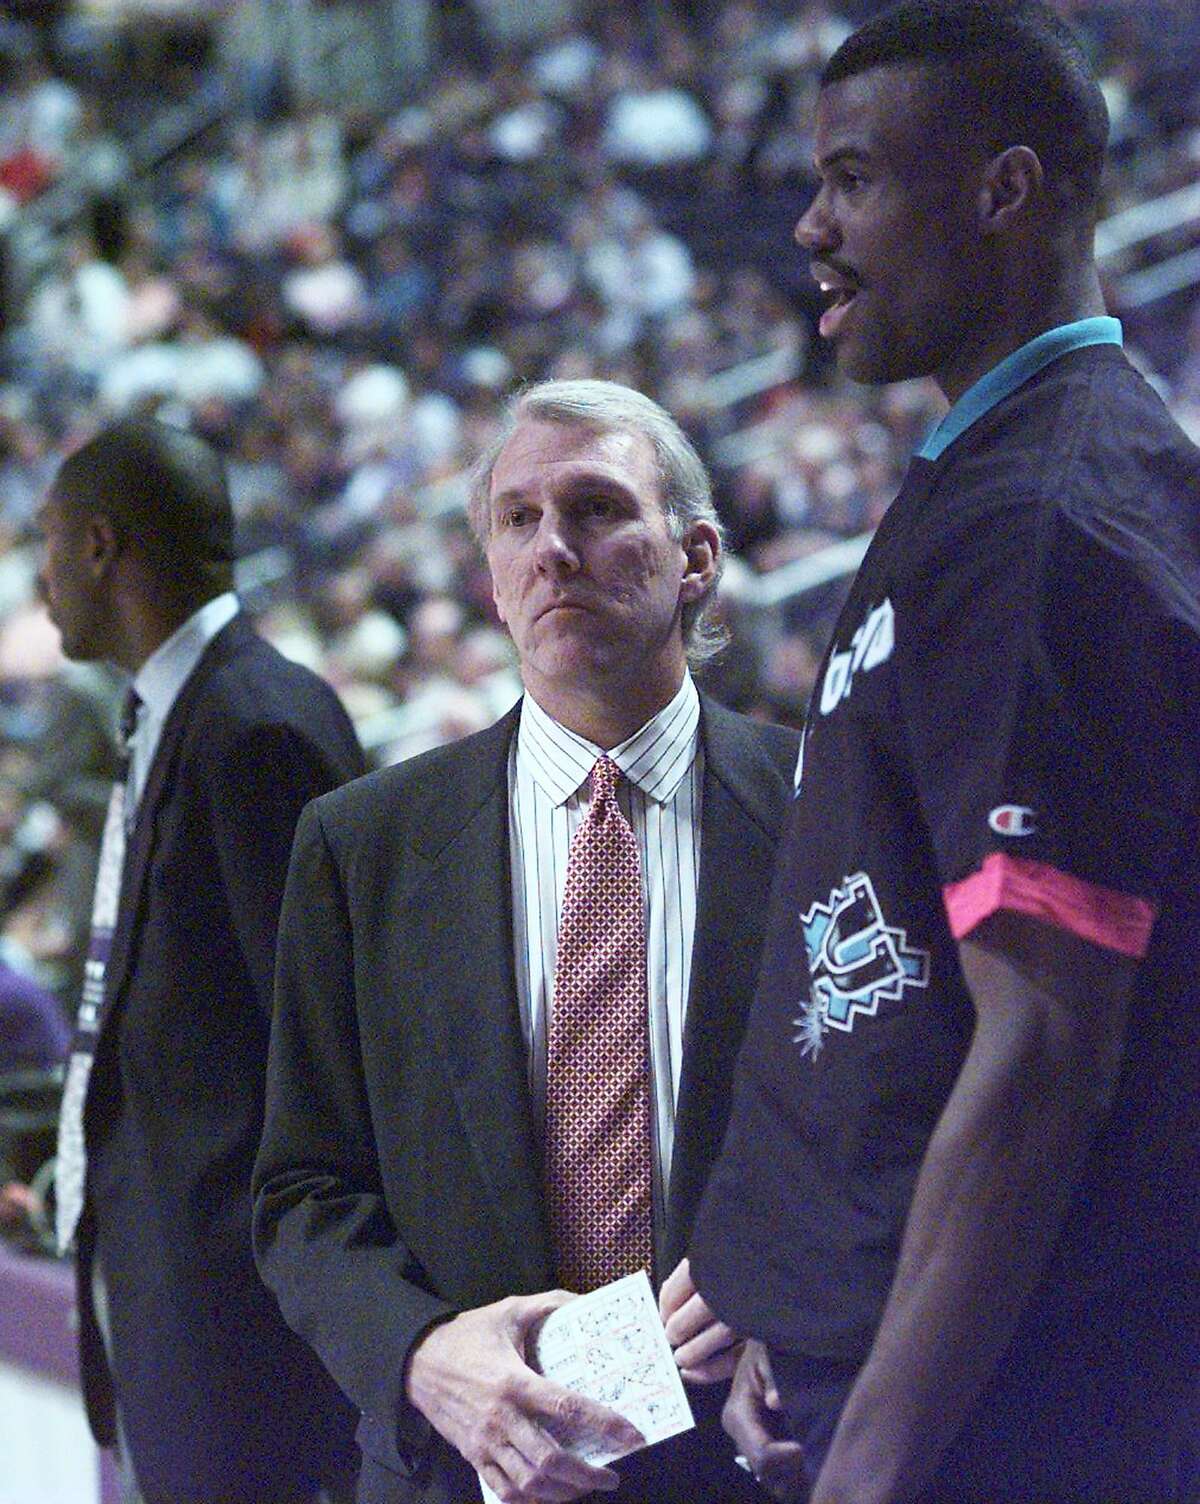 New Coach Gregg Popovich and David Robinson confer just before the start of the game in Phoenix against the Suns on Dec. 10, 1996, which the Spurs lost.